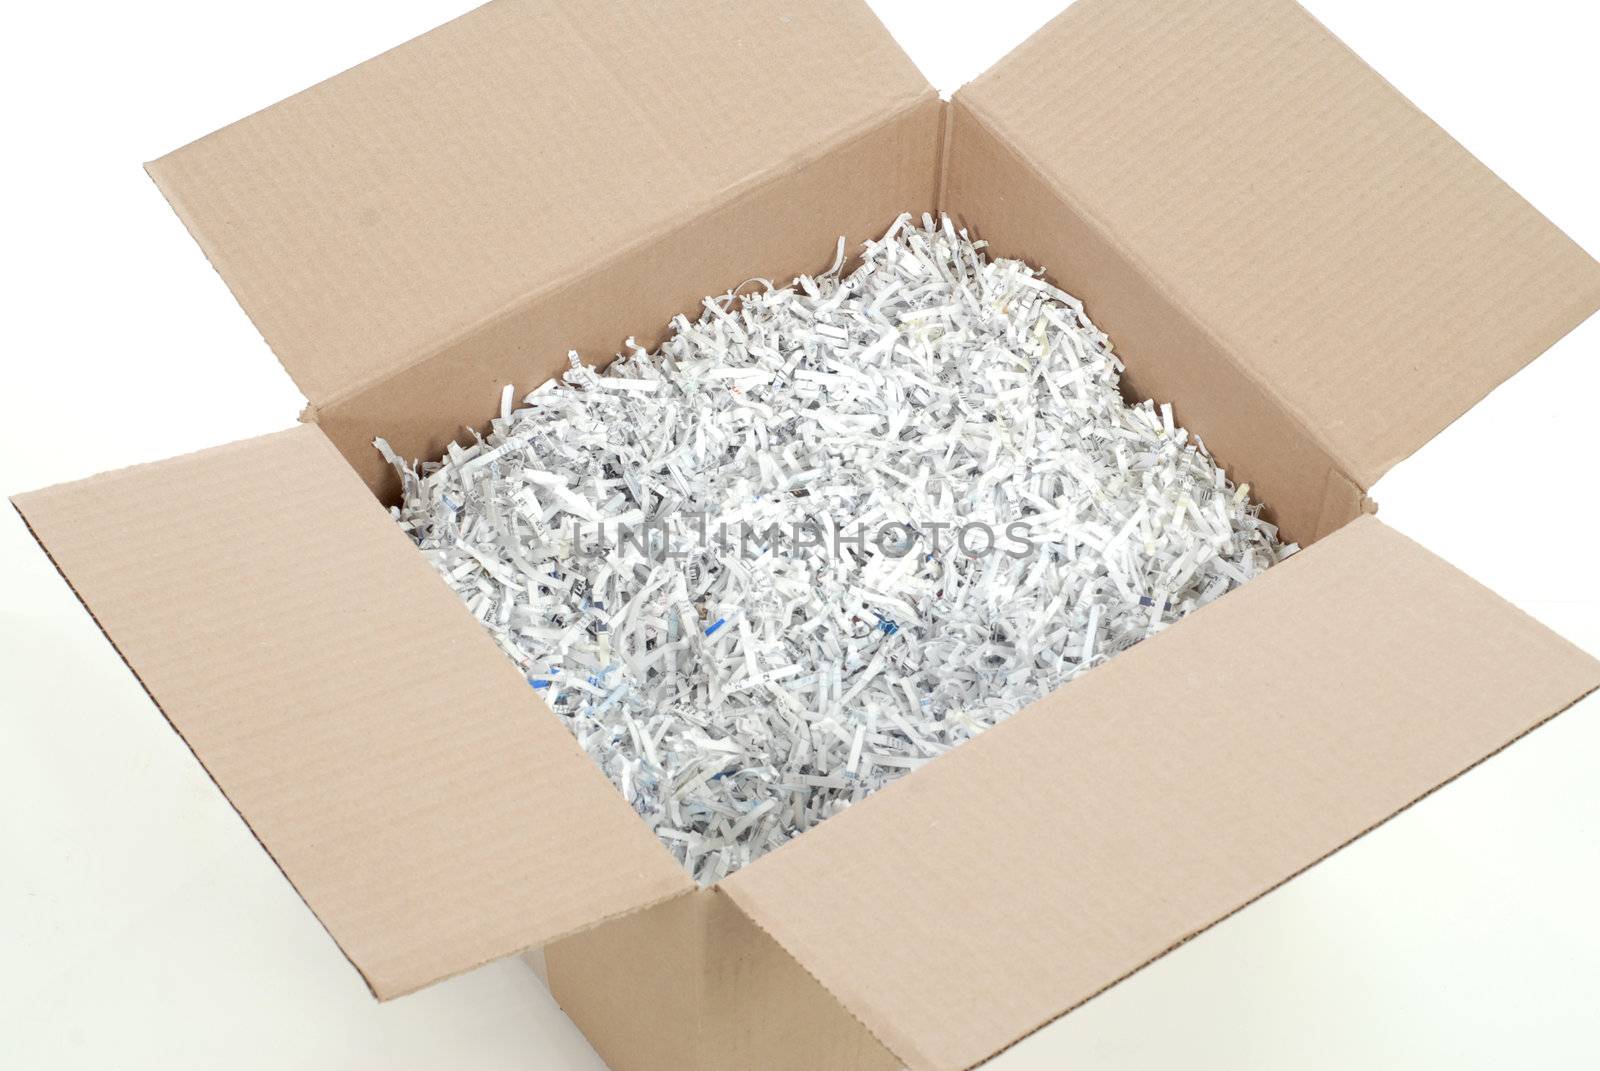 box of shredded paper by willeecole123